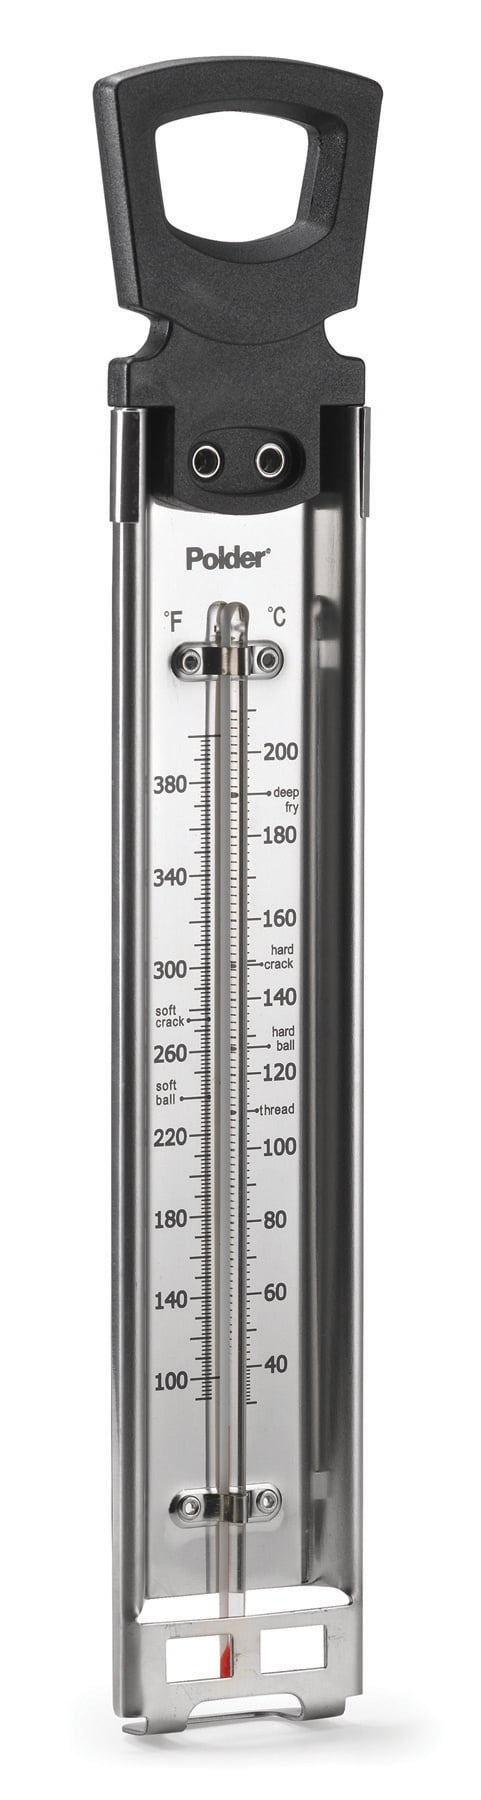 Polder Digital Baking & Candy Thermometer - Shop Utensils & Gadgets at H-E-B